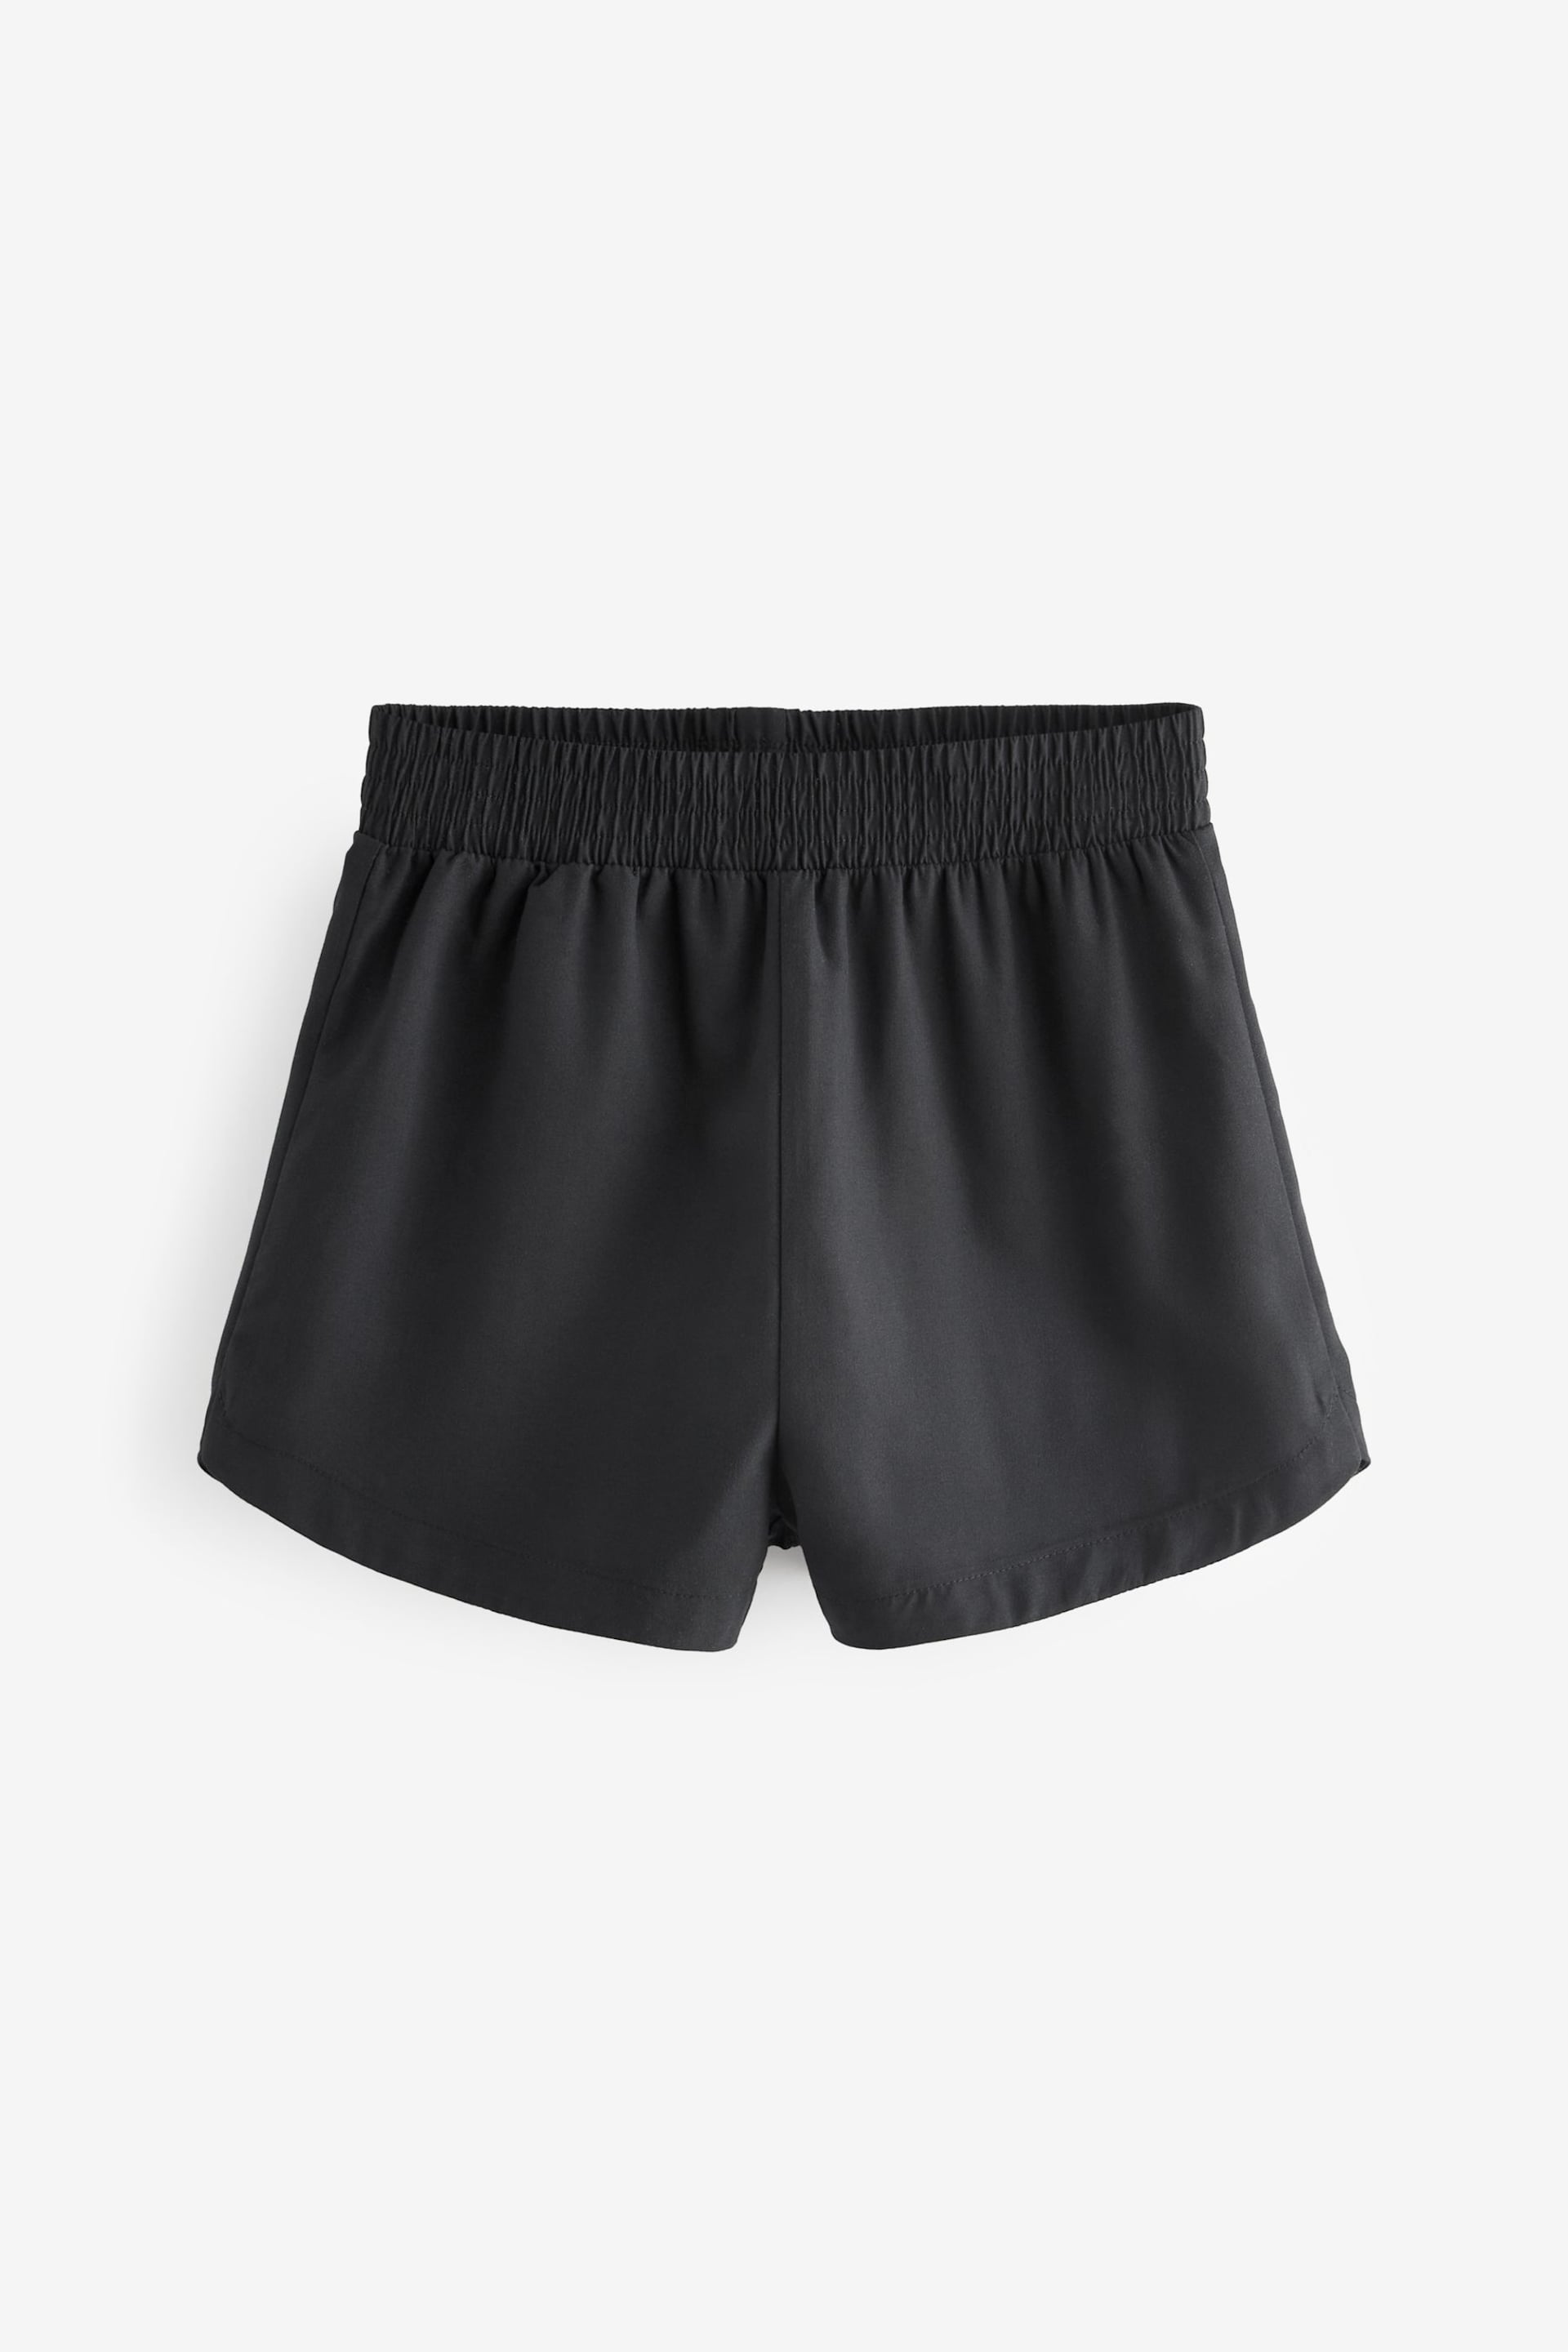 Black 2-In-1 Shorts - Image 5 of 7